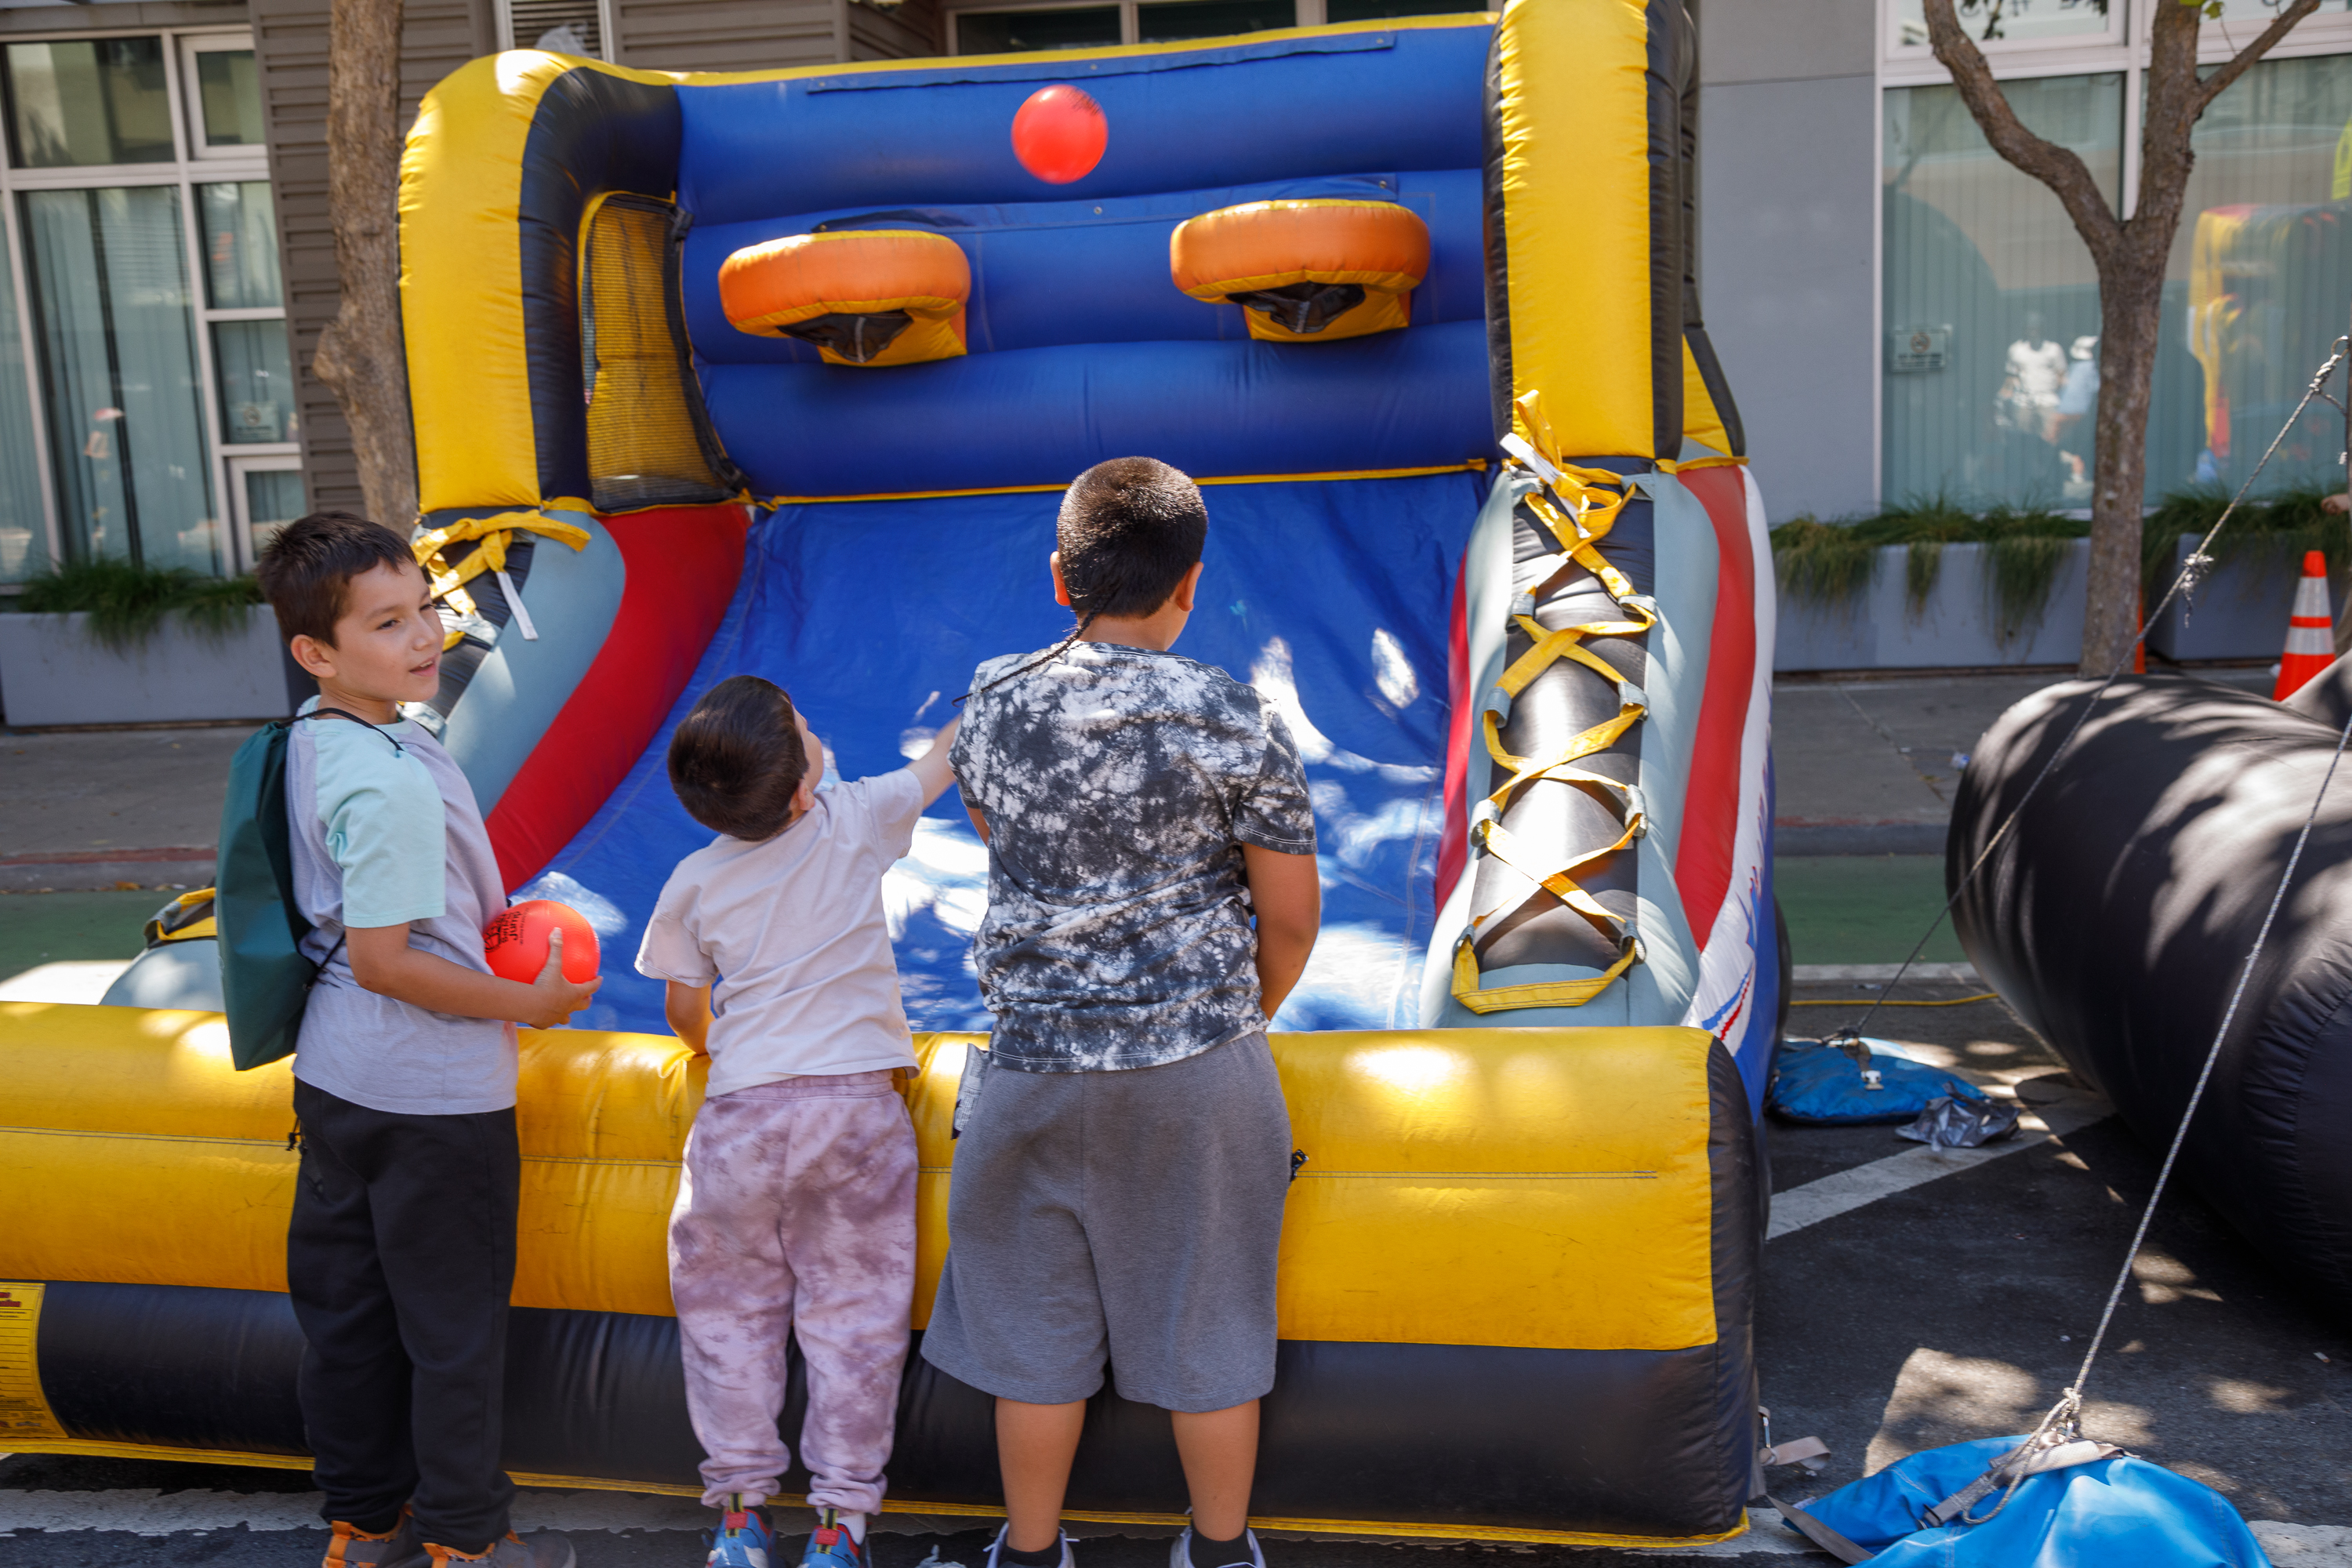 Three kids are in front of an inflatable bouncy castle, with one holding a red ball. They appear ready to play.